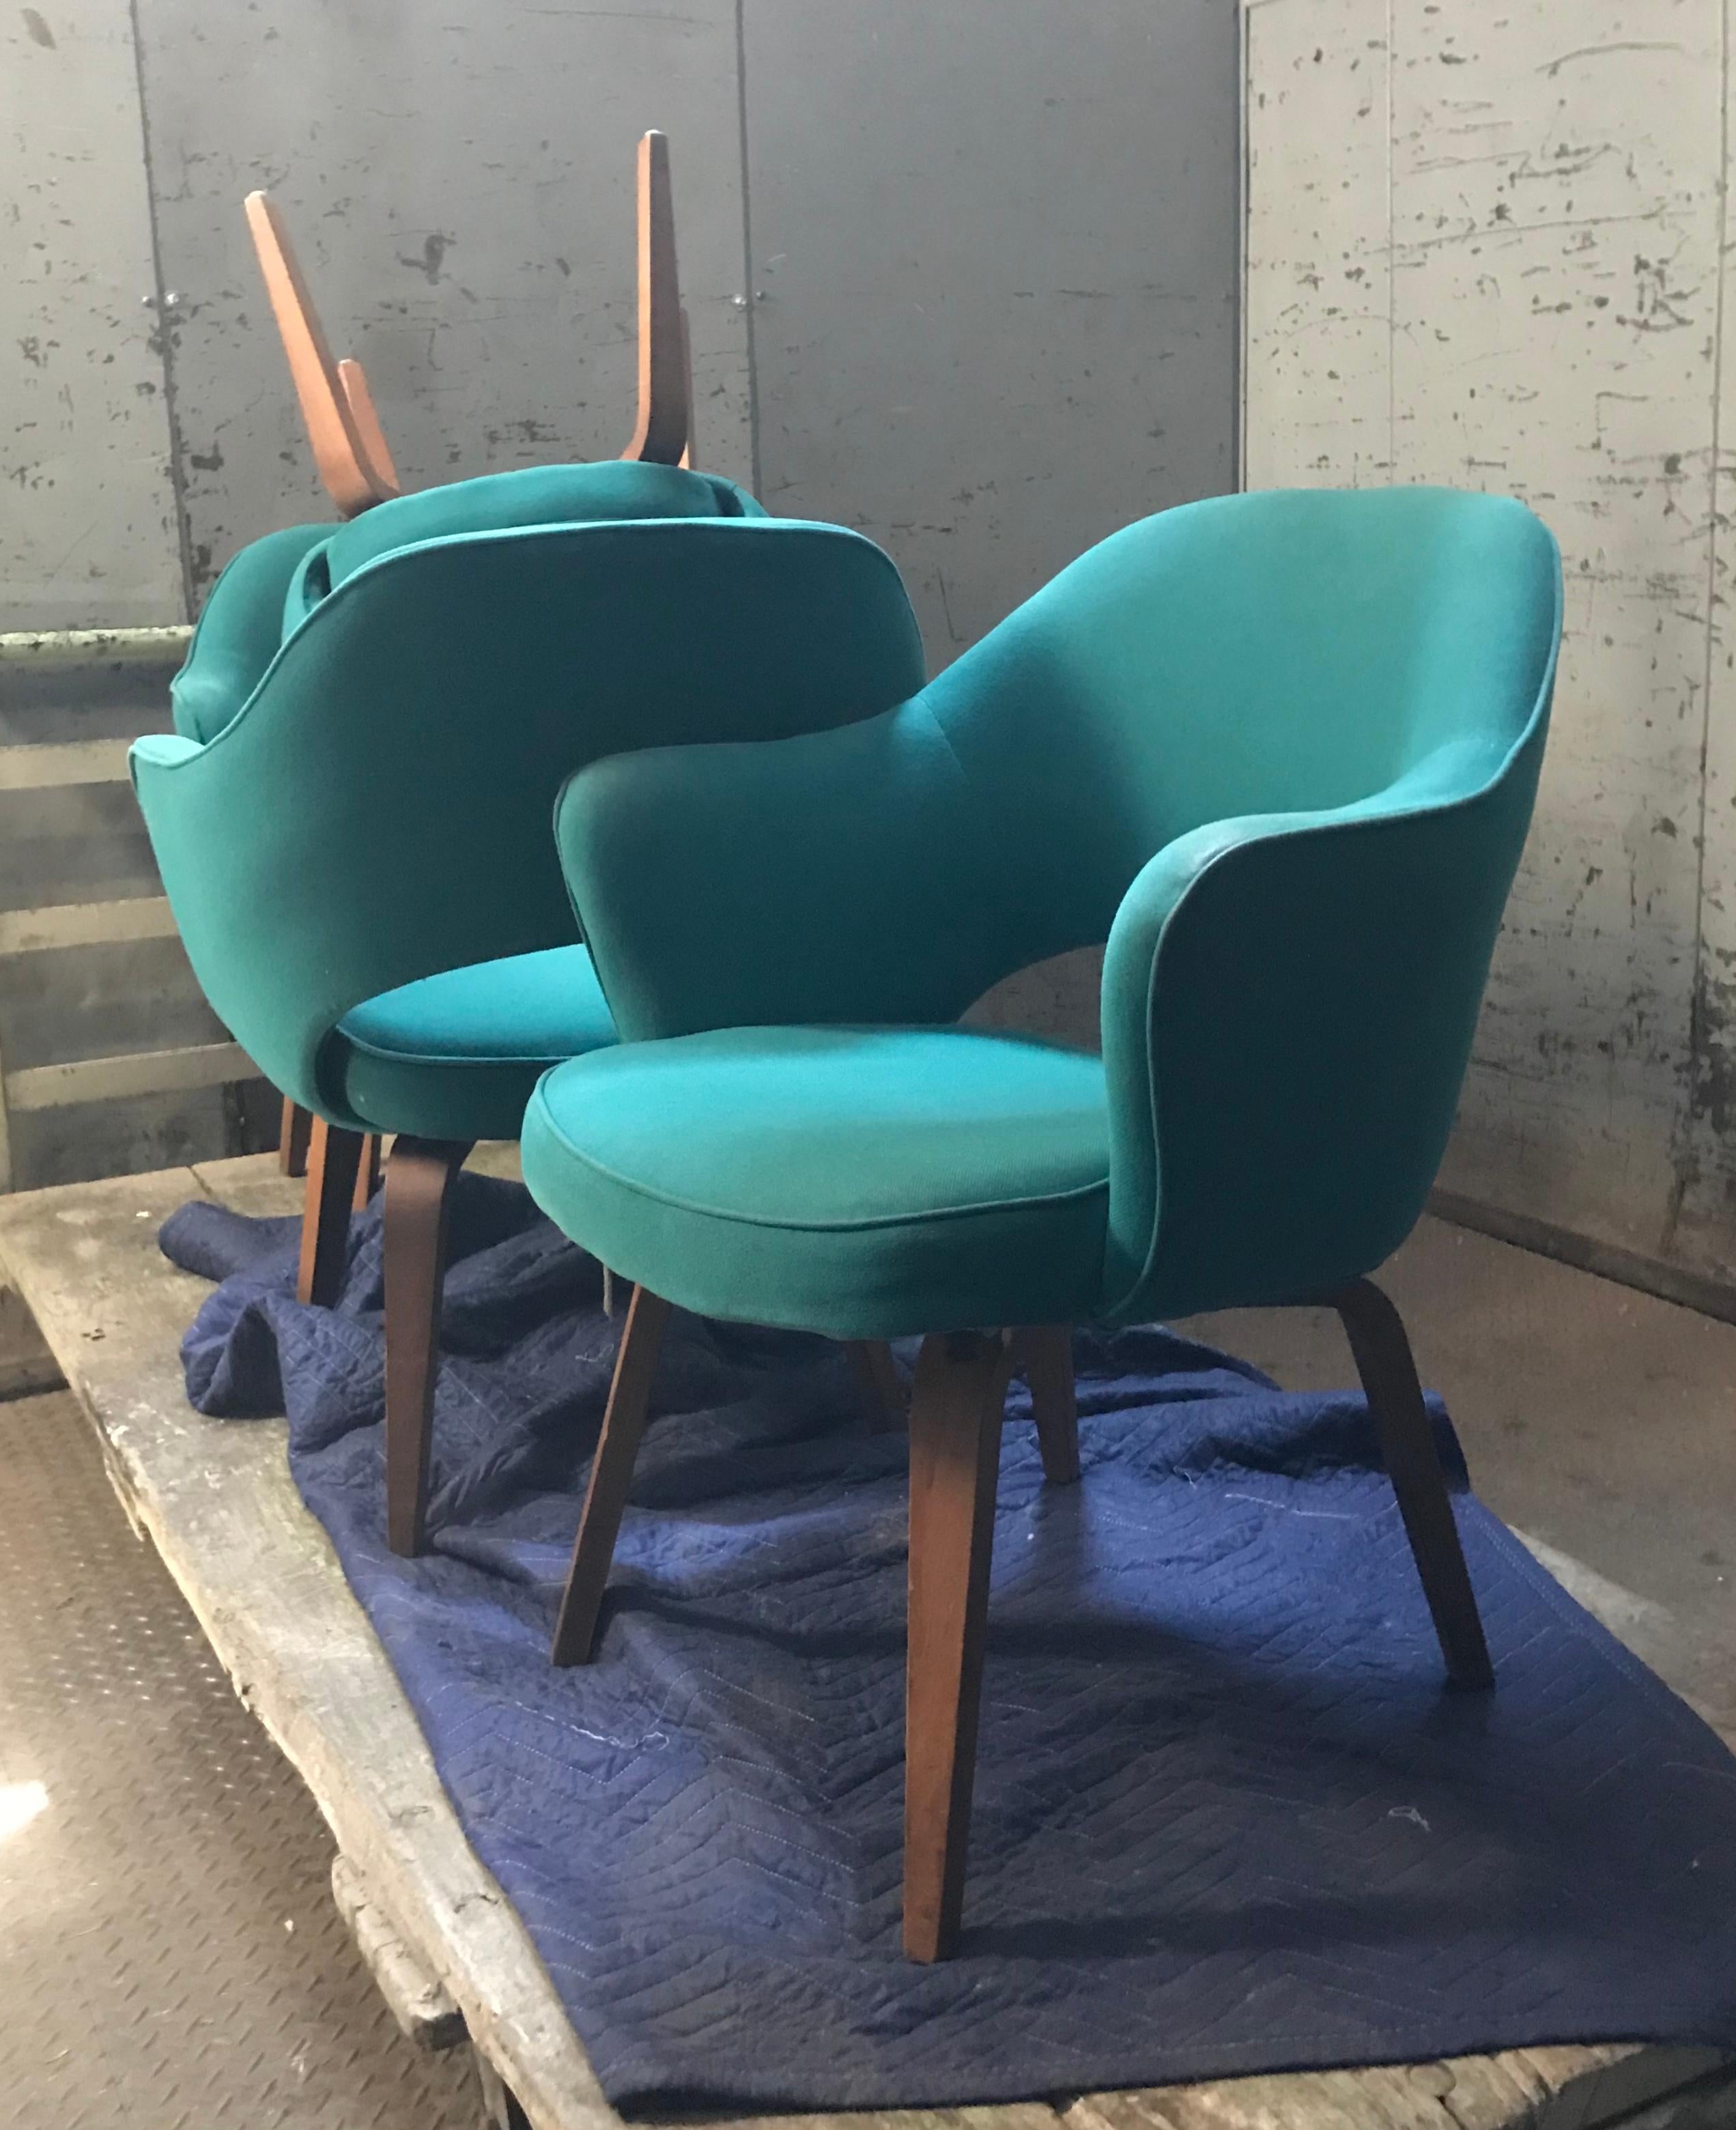 Matched set of FOUR early Knoll Saarinen executive armchairs with bentwood legs, pair of Knoll Saarinen Executive armchairs 

1950s design.
Molded reinforced polyurethane shell
Contoured plywood seat form.
Bentwood legs
Retains original teal green